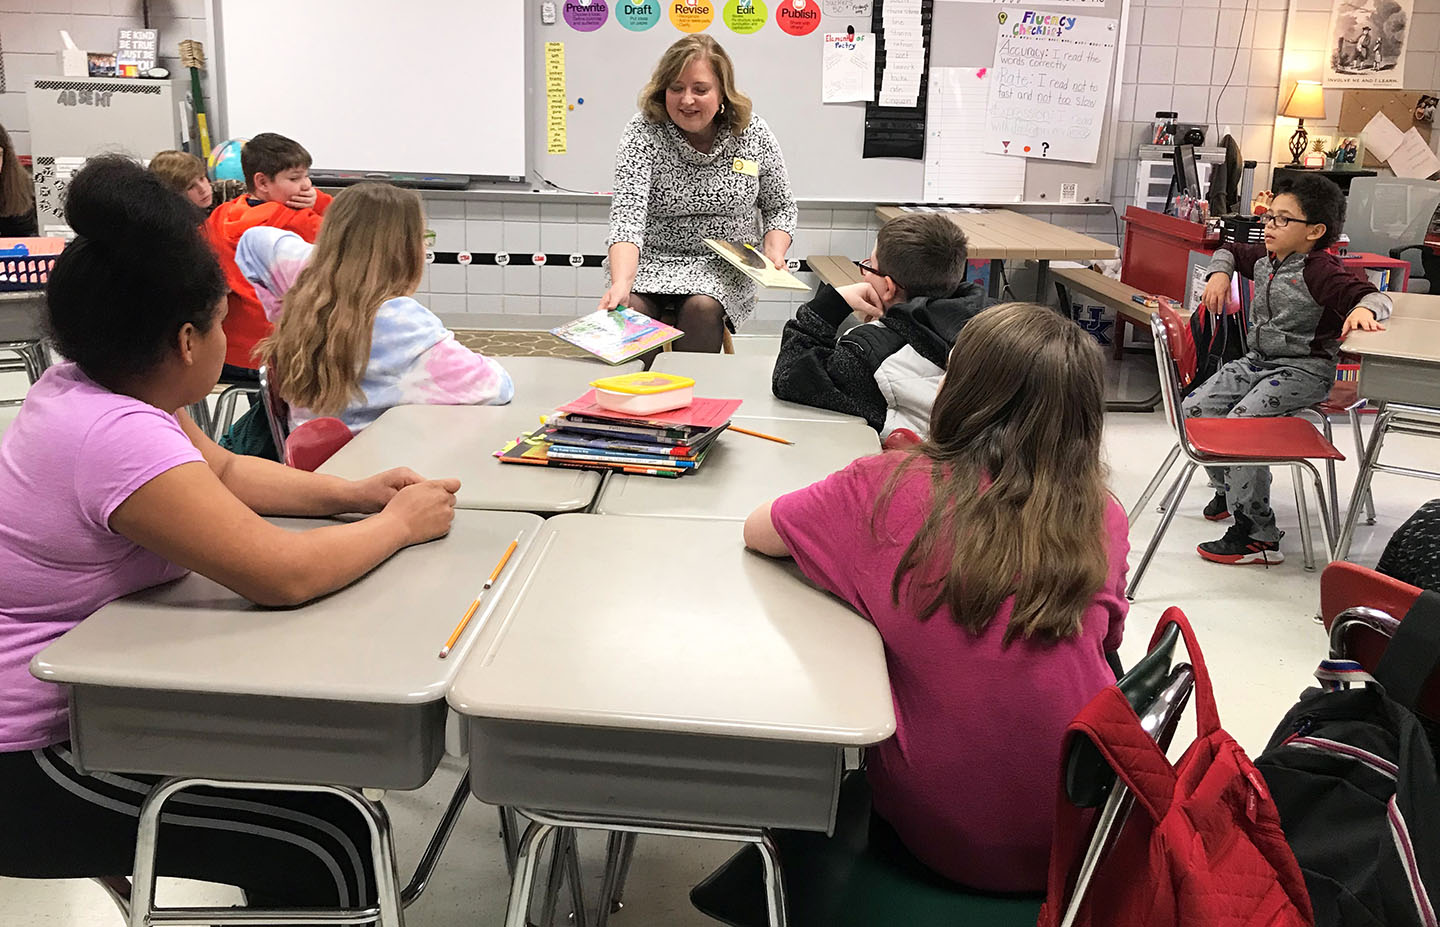 Holly Bloodworth, center, a Kentucky Board of Education member who spent 32 years teaching at Murray Elementary School, serves as a guest reader in Trina Fuller's 4th-grade class at Hickman Elementary School.